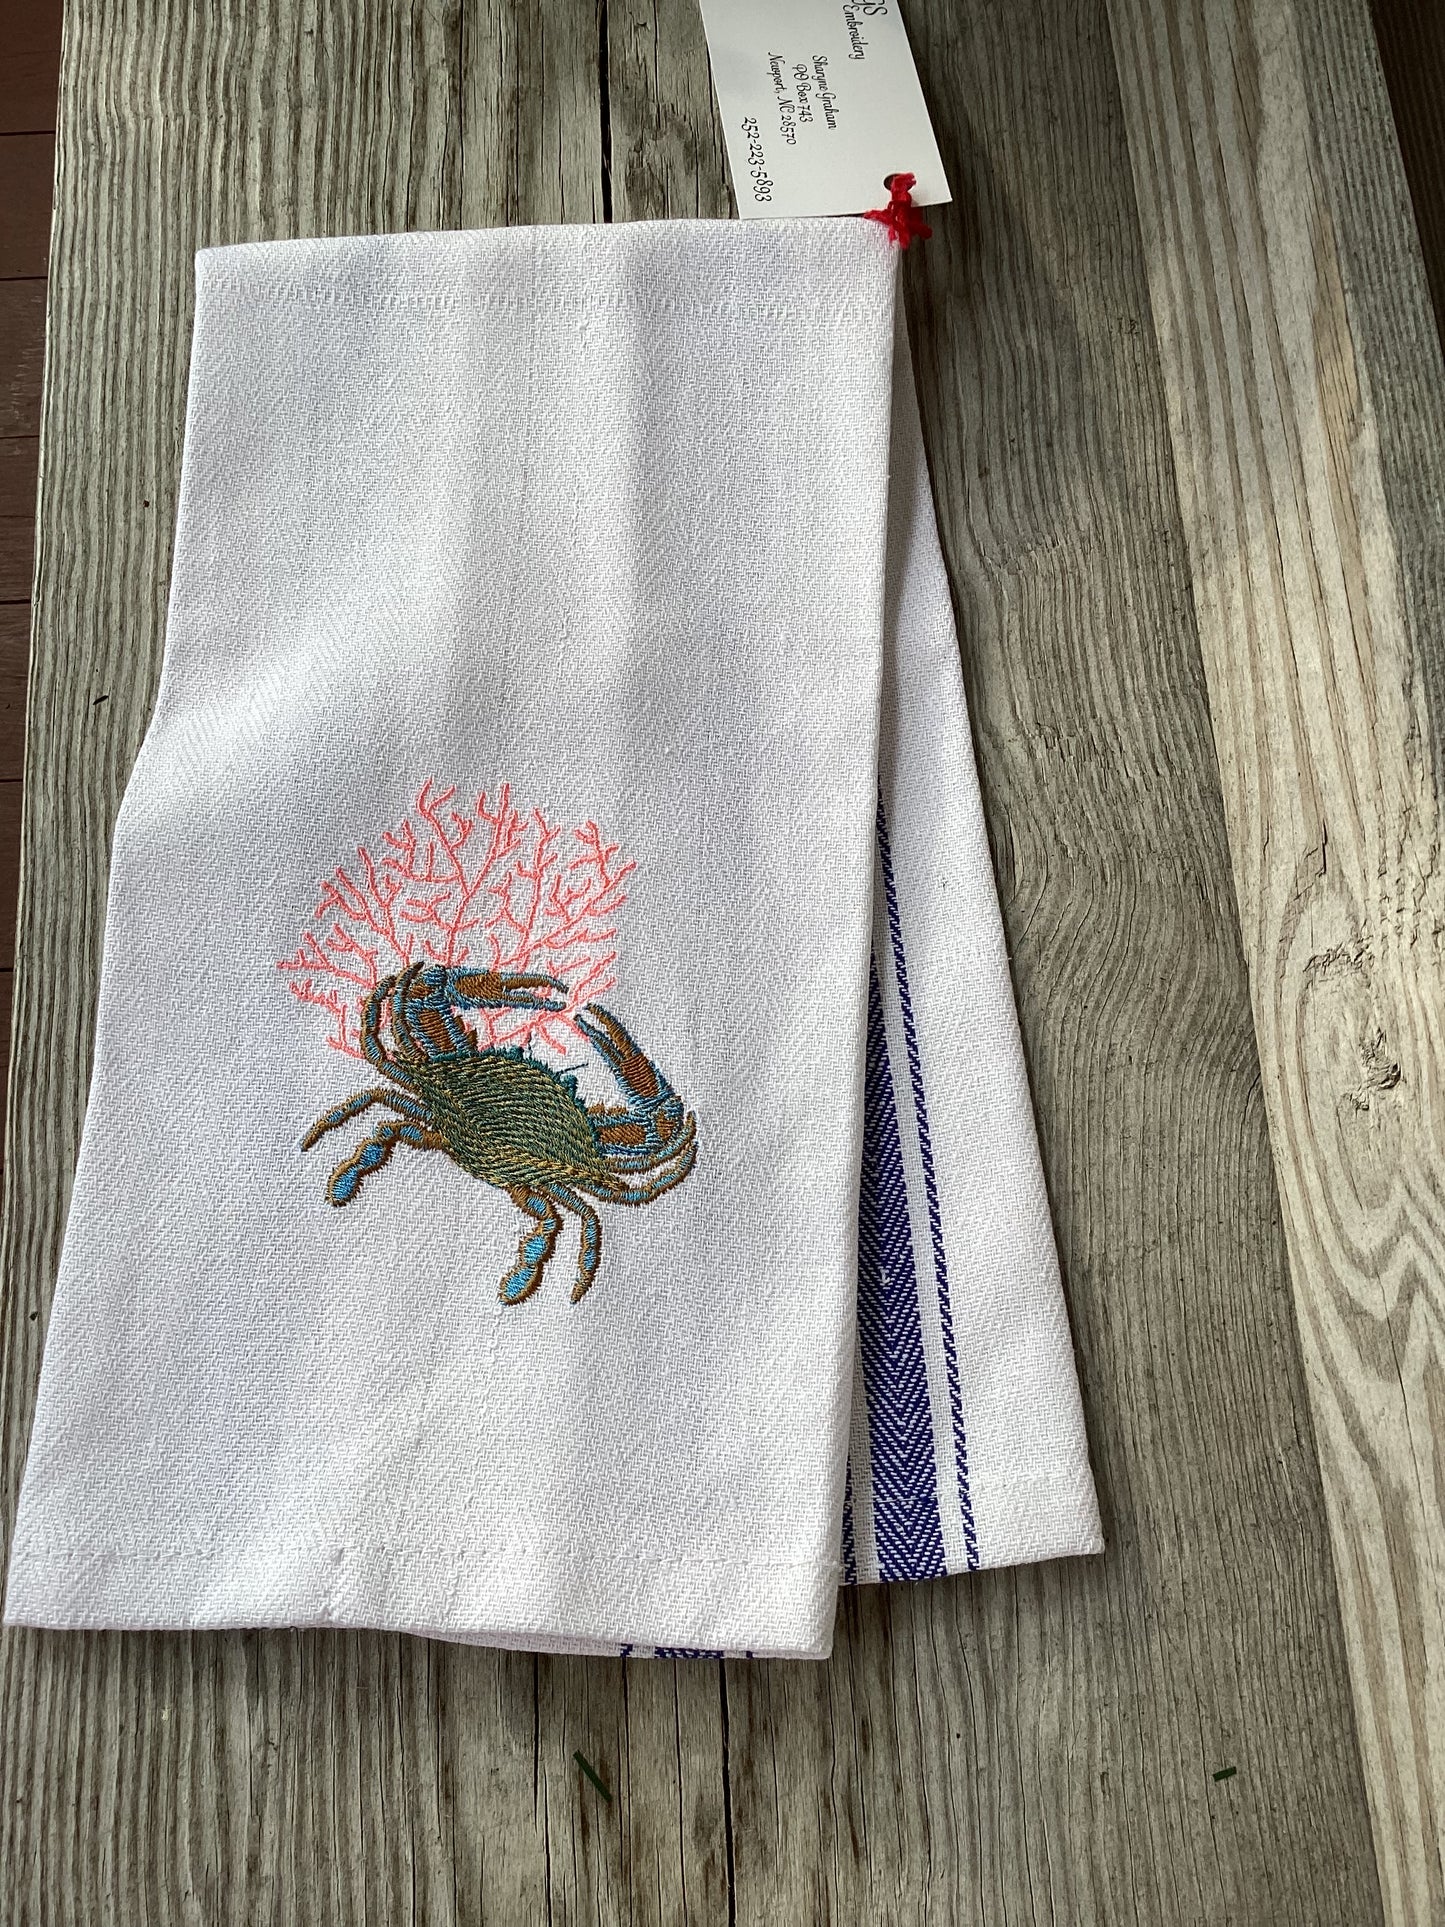 Embroidery Tee Towels Several Designs